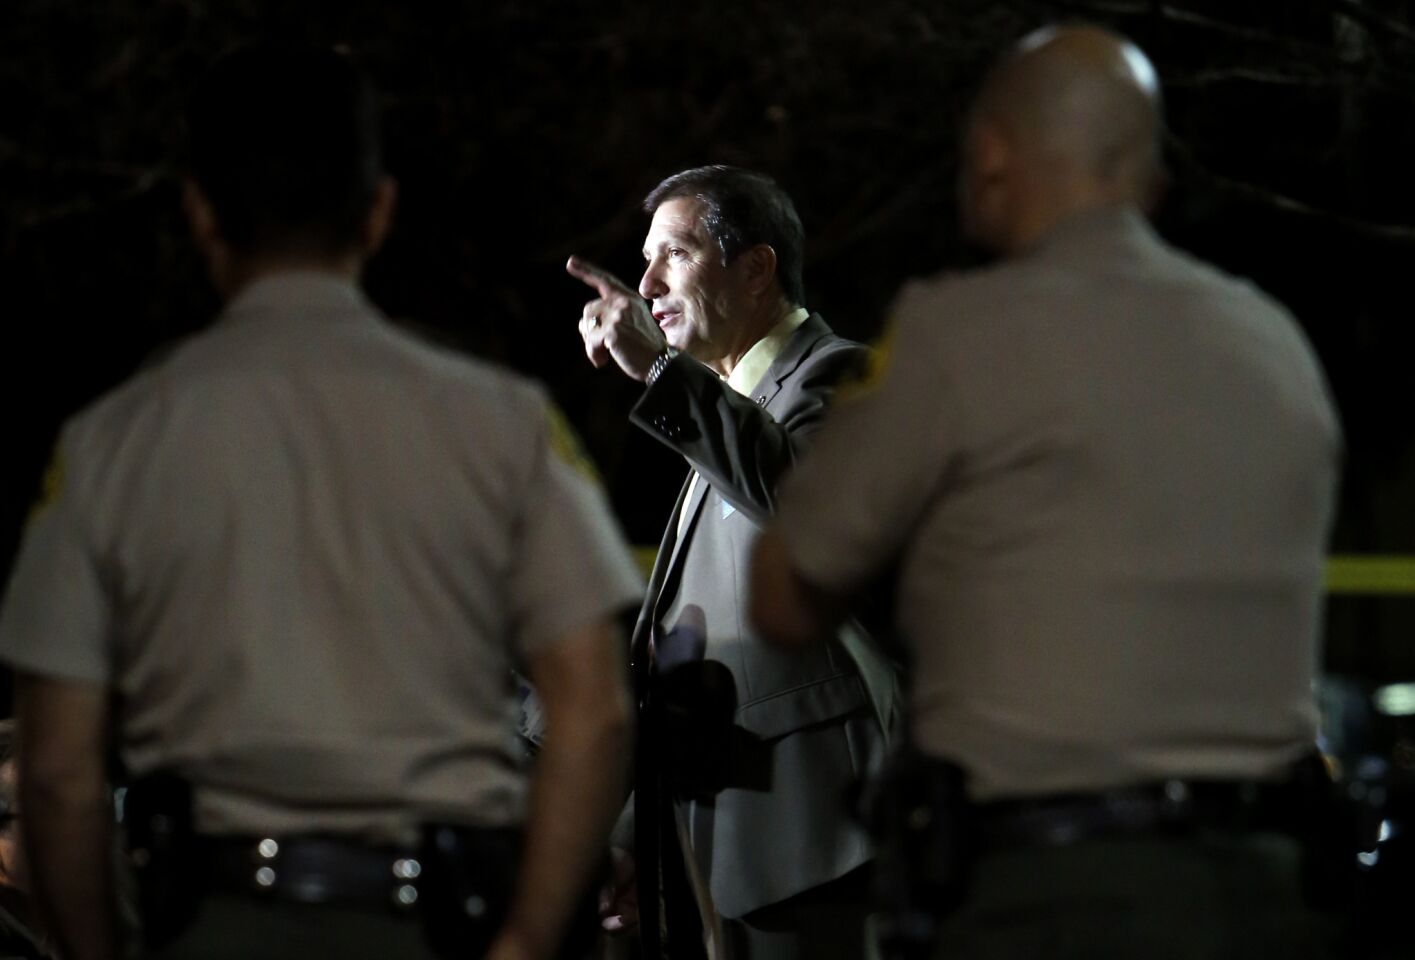 Lt. John Corina of the L.A. County Sheriff's Department at a news conference Thursday night on the hit-and-run involving music mogul Suge Knight. Investigators are treating it as a homicide.